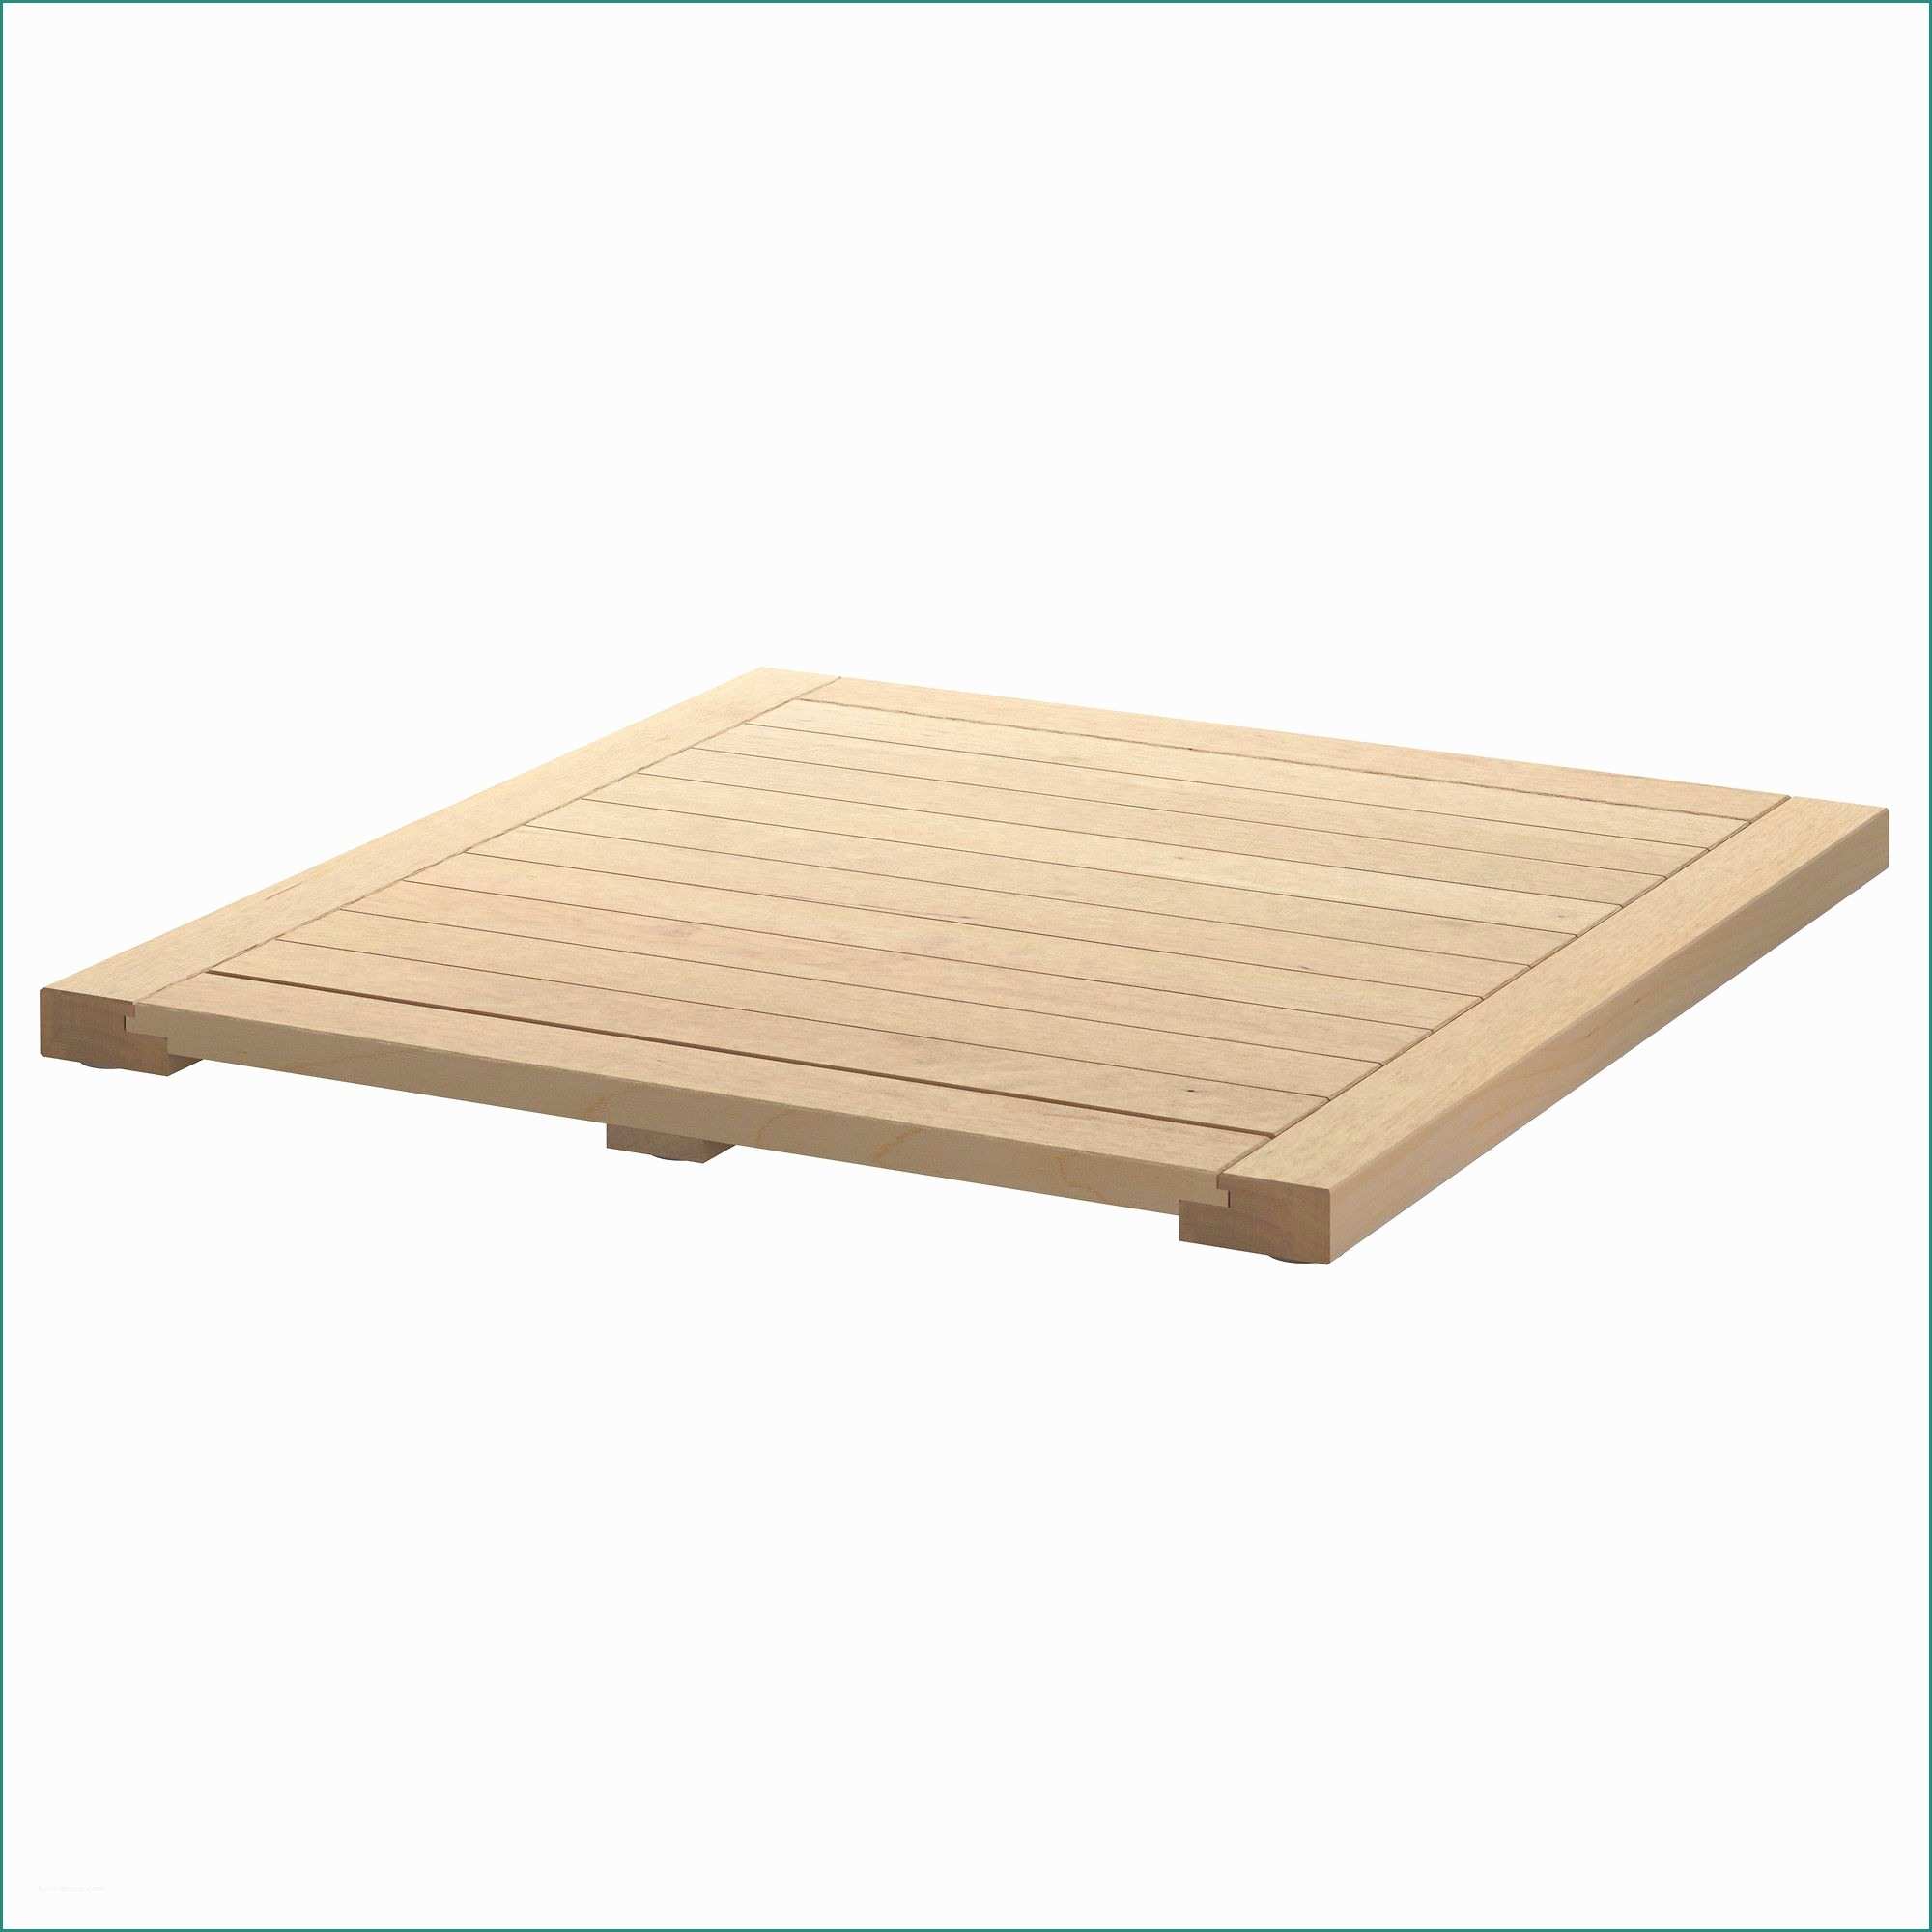 Pedane Legno Ikea E Molger Decking Birch Ikea for Extra Shelving and Footholds for